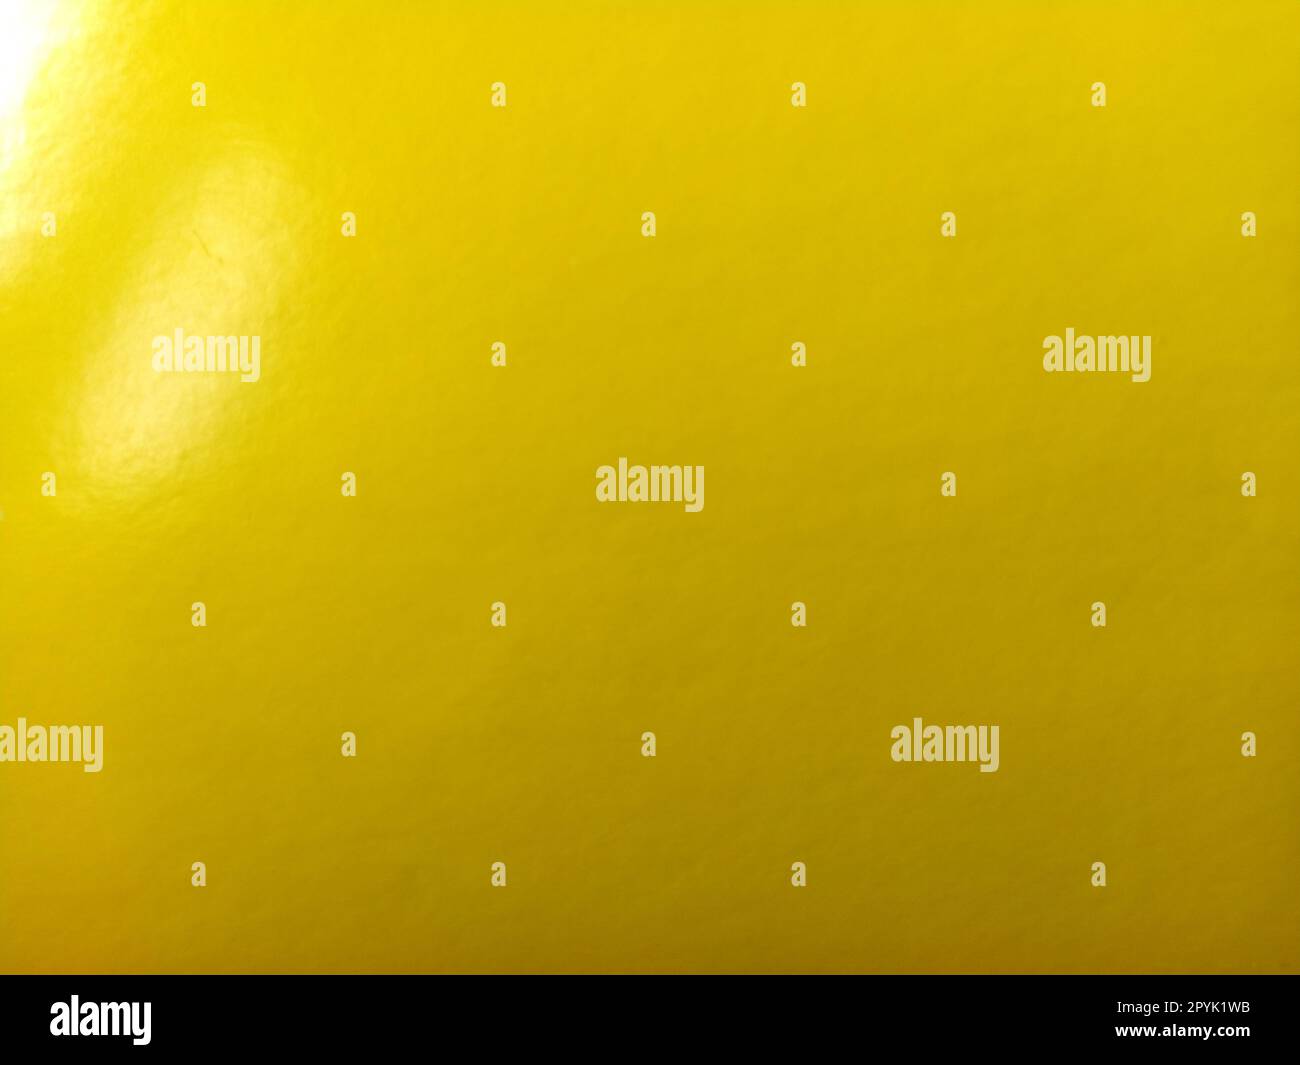 Beautiful bright yellow background. Close-up sheet of shiny reflective incident light paper. Pure fun color. Intense shade of yellow, close to gold or sunny with high reflectivity Stock Photo